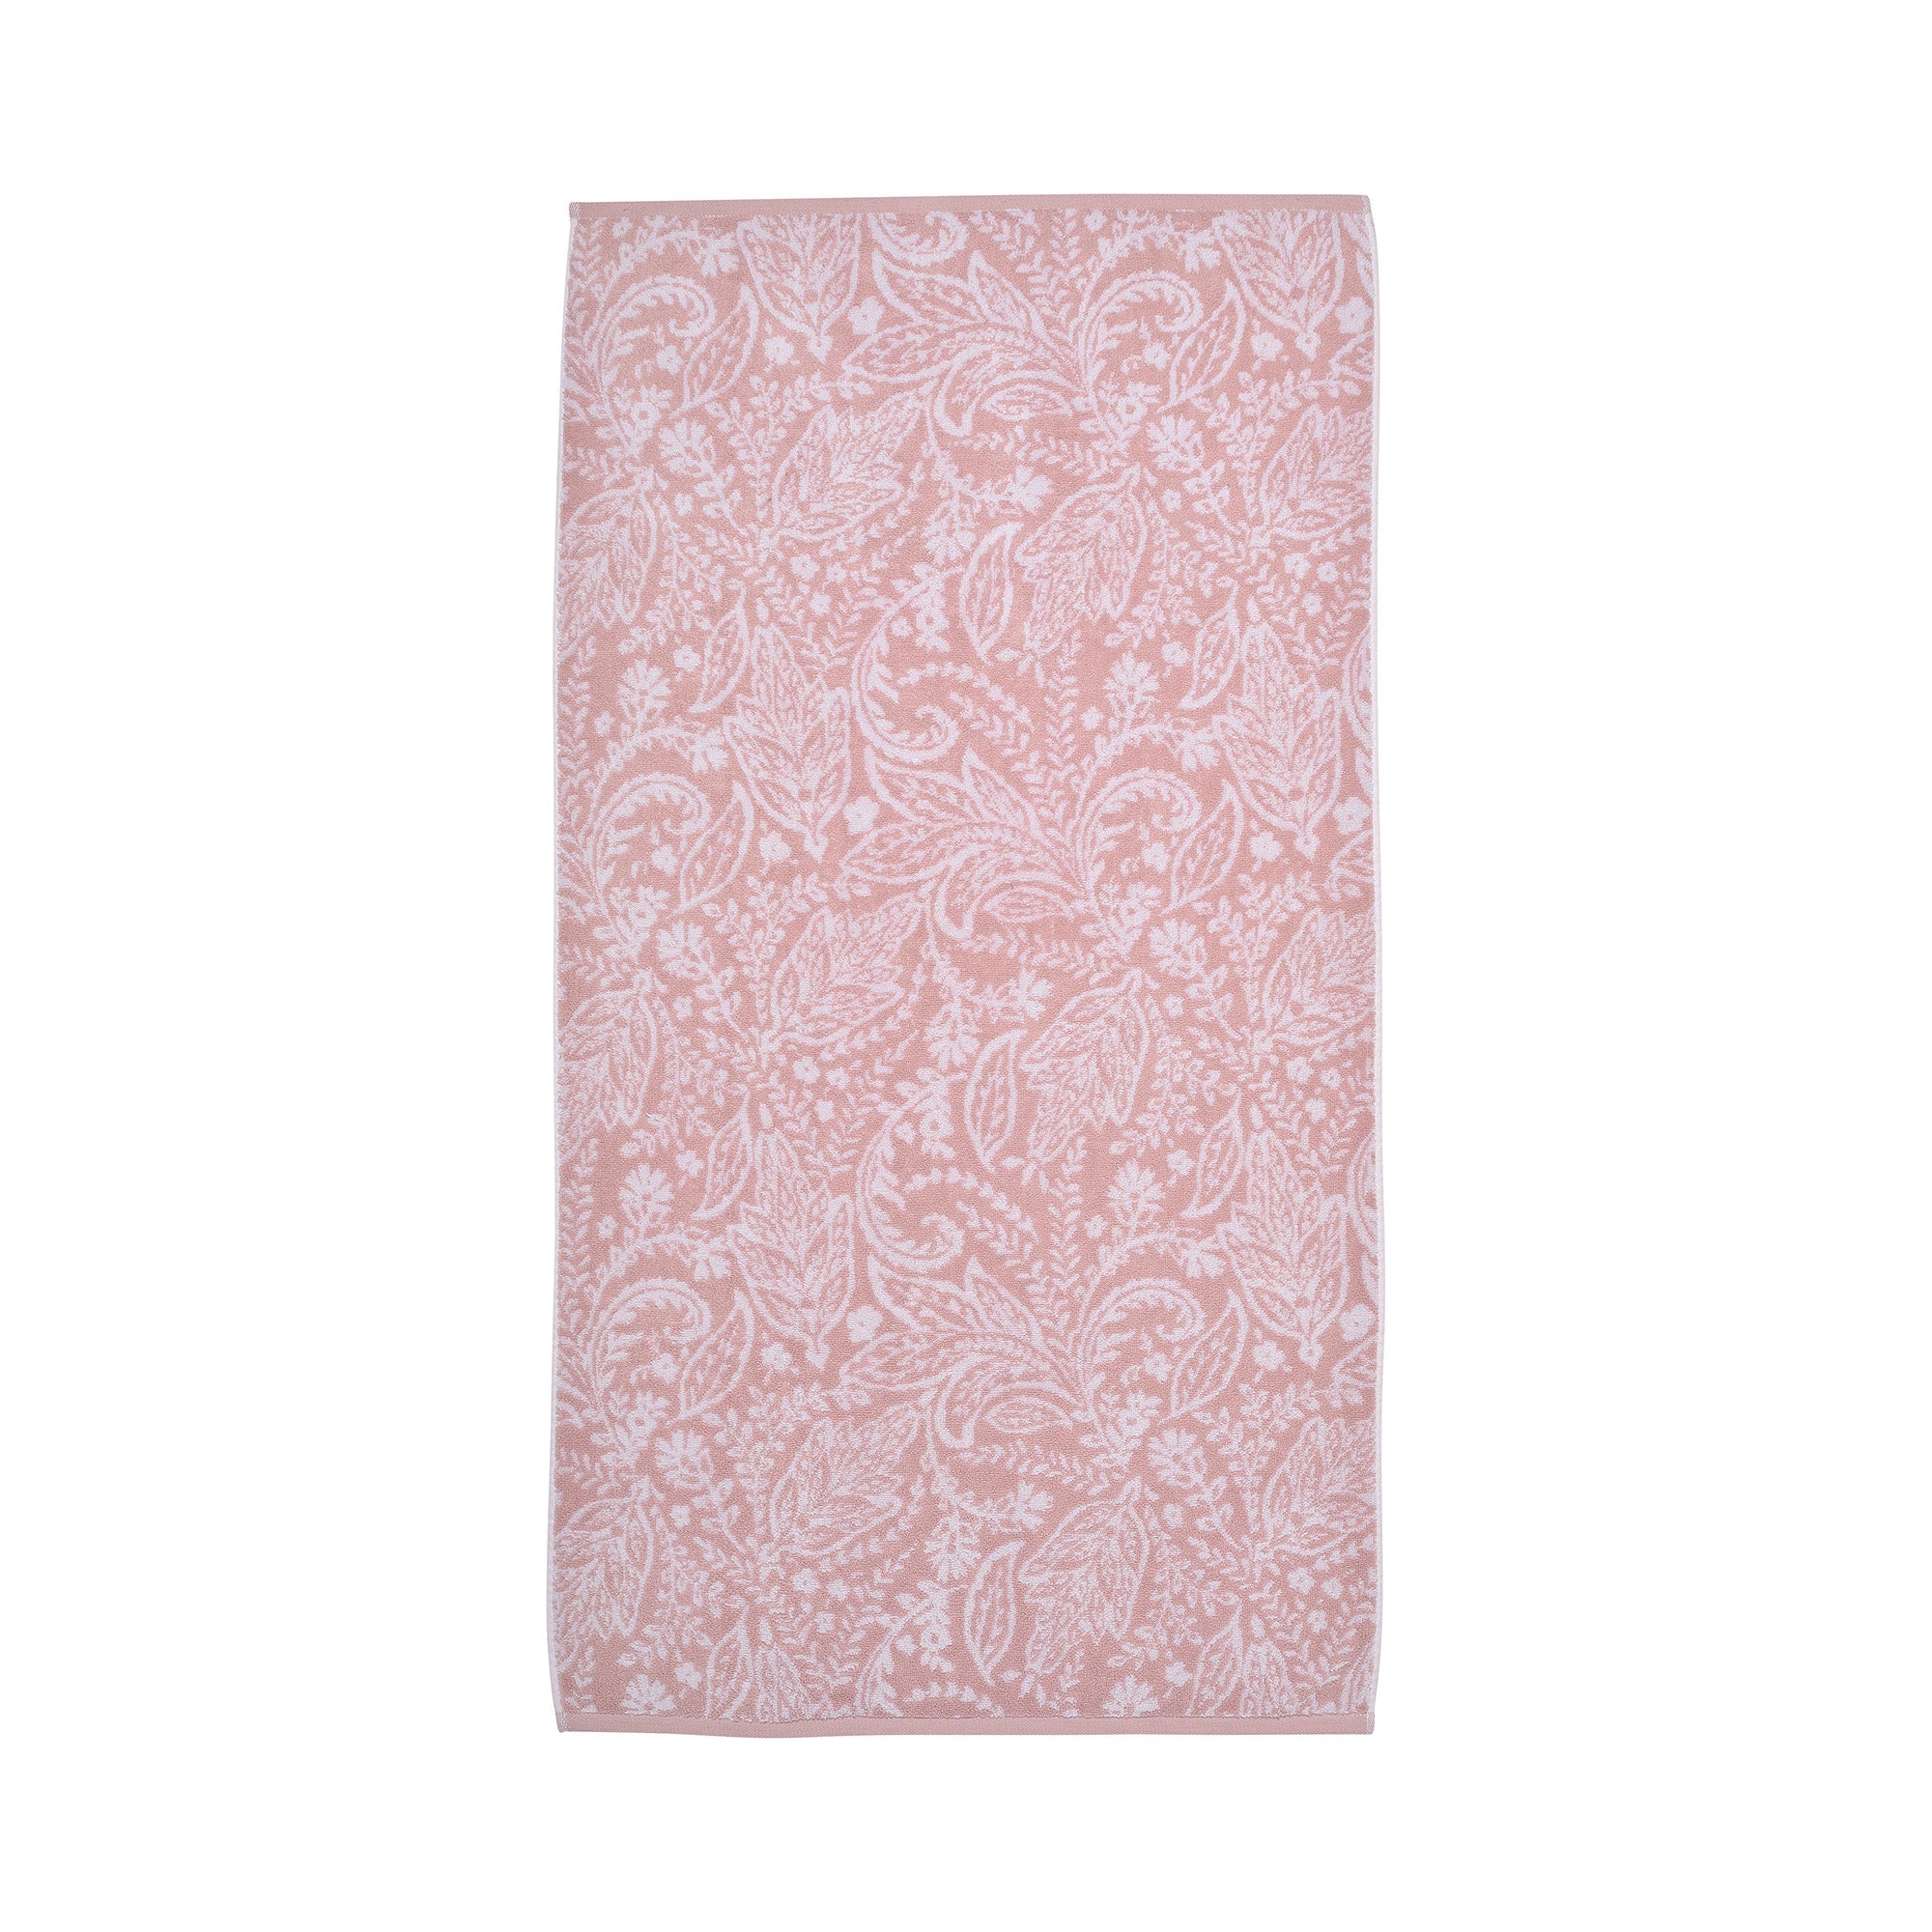 Hand Towel Aveline by D&D Bathroom in Soft Pink